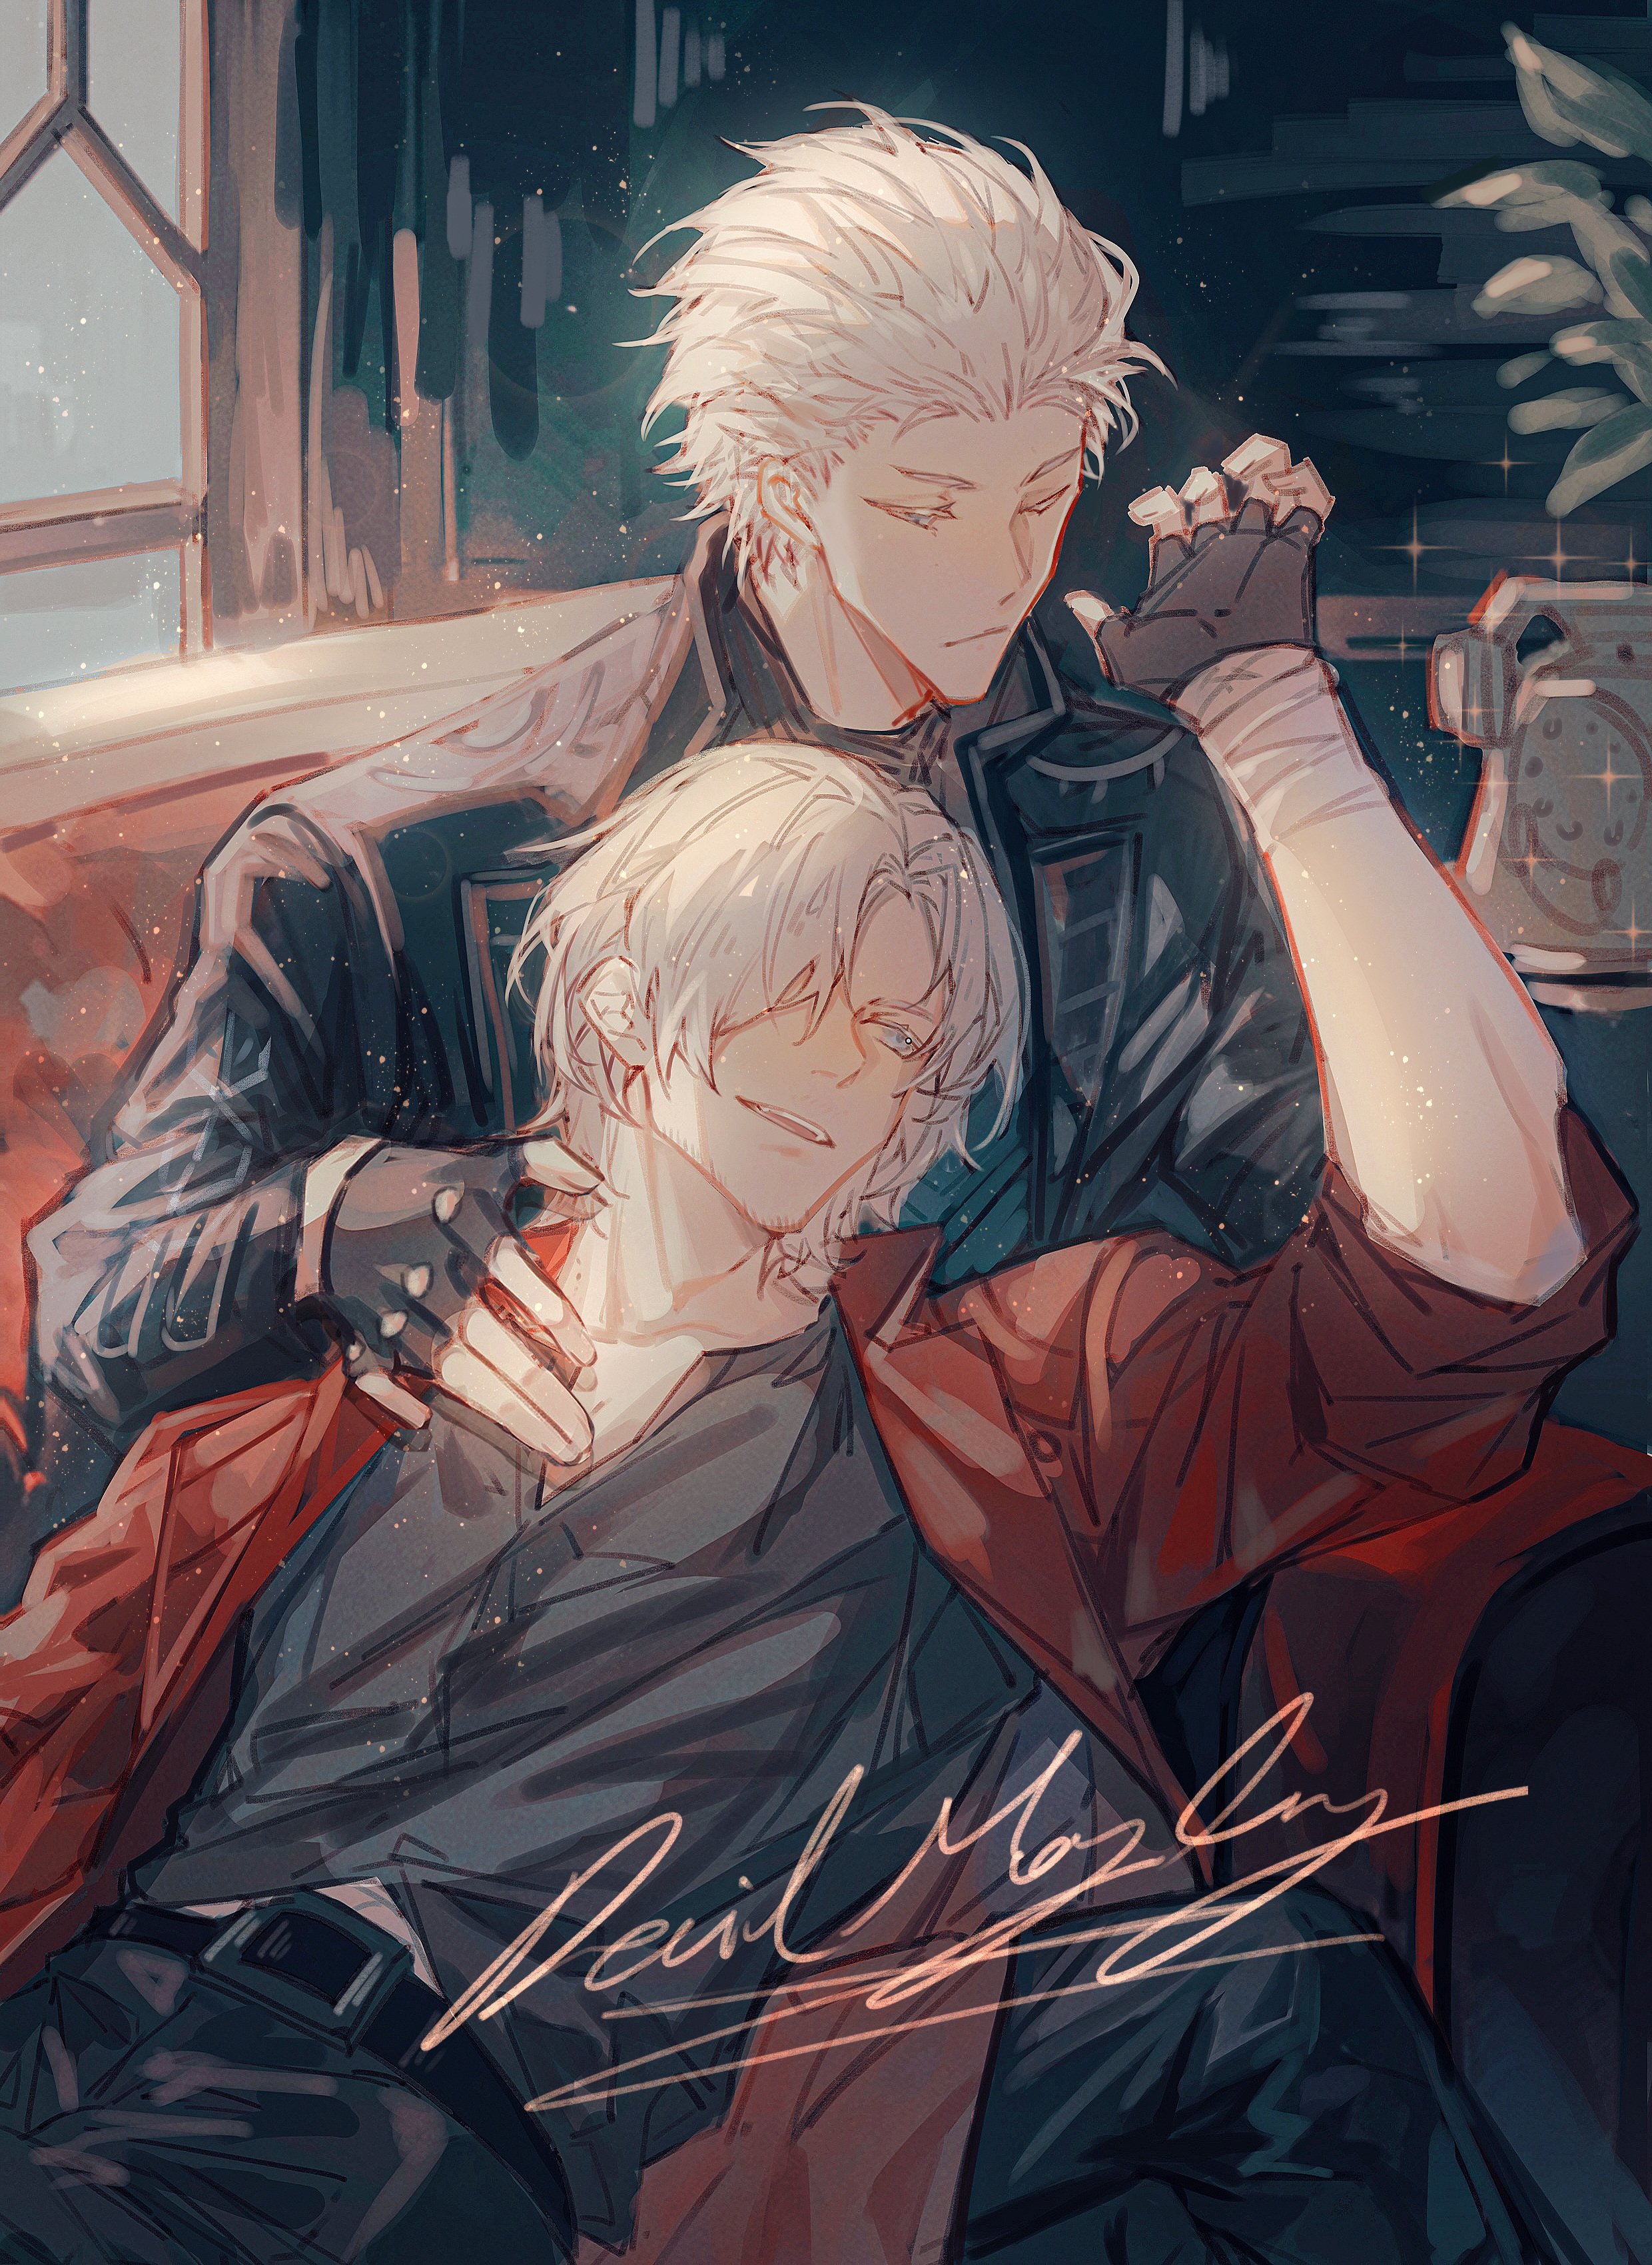 Kちゃん on X: #DevilMayCry #DMC #Dante #Vergil I just want to